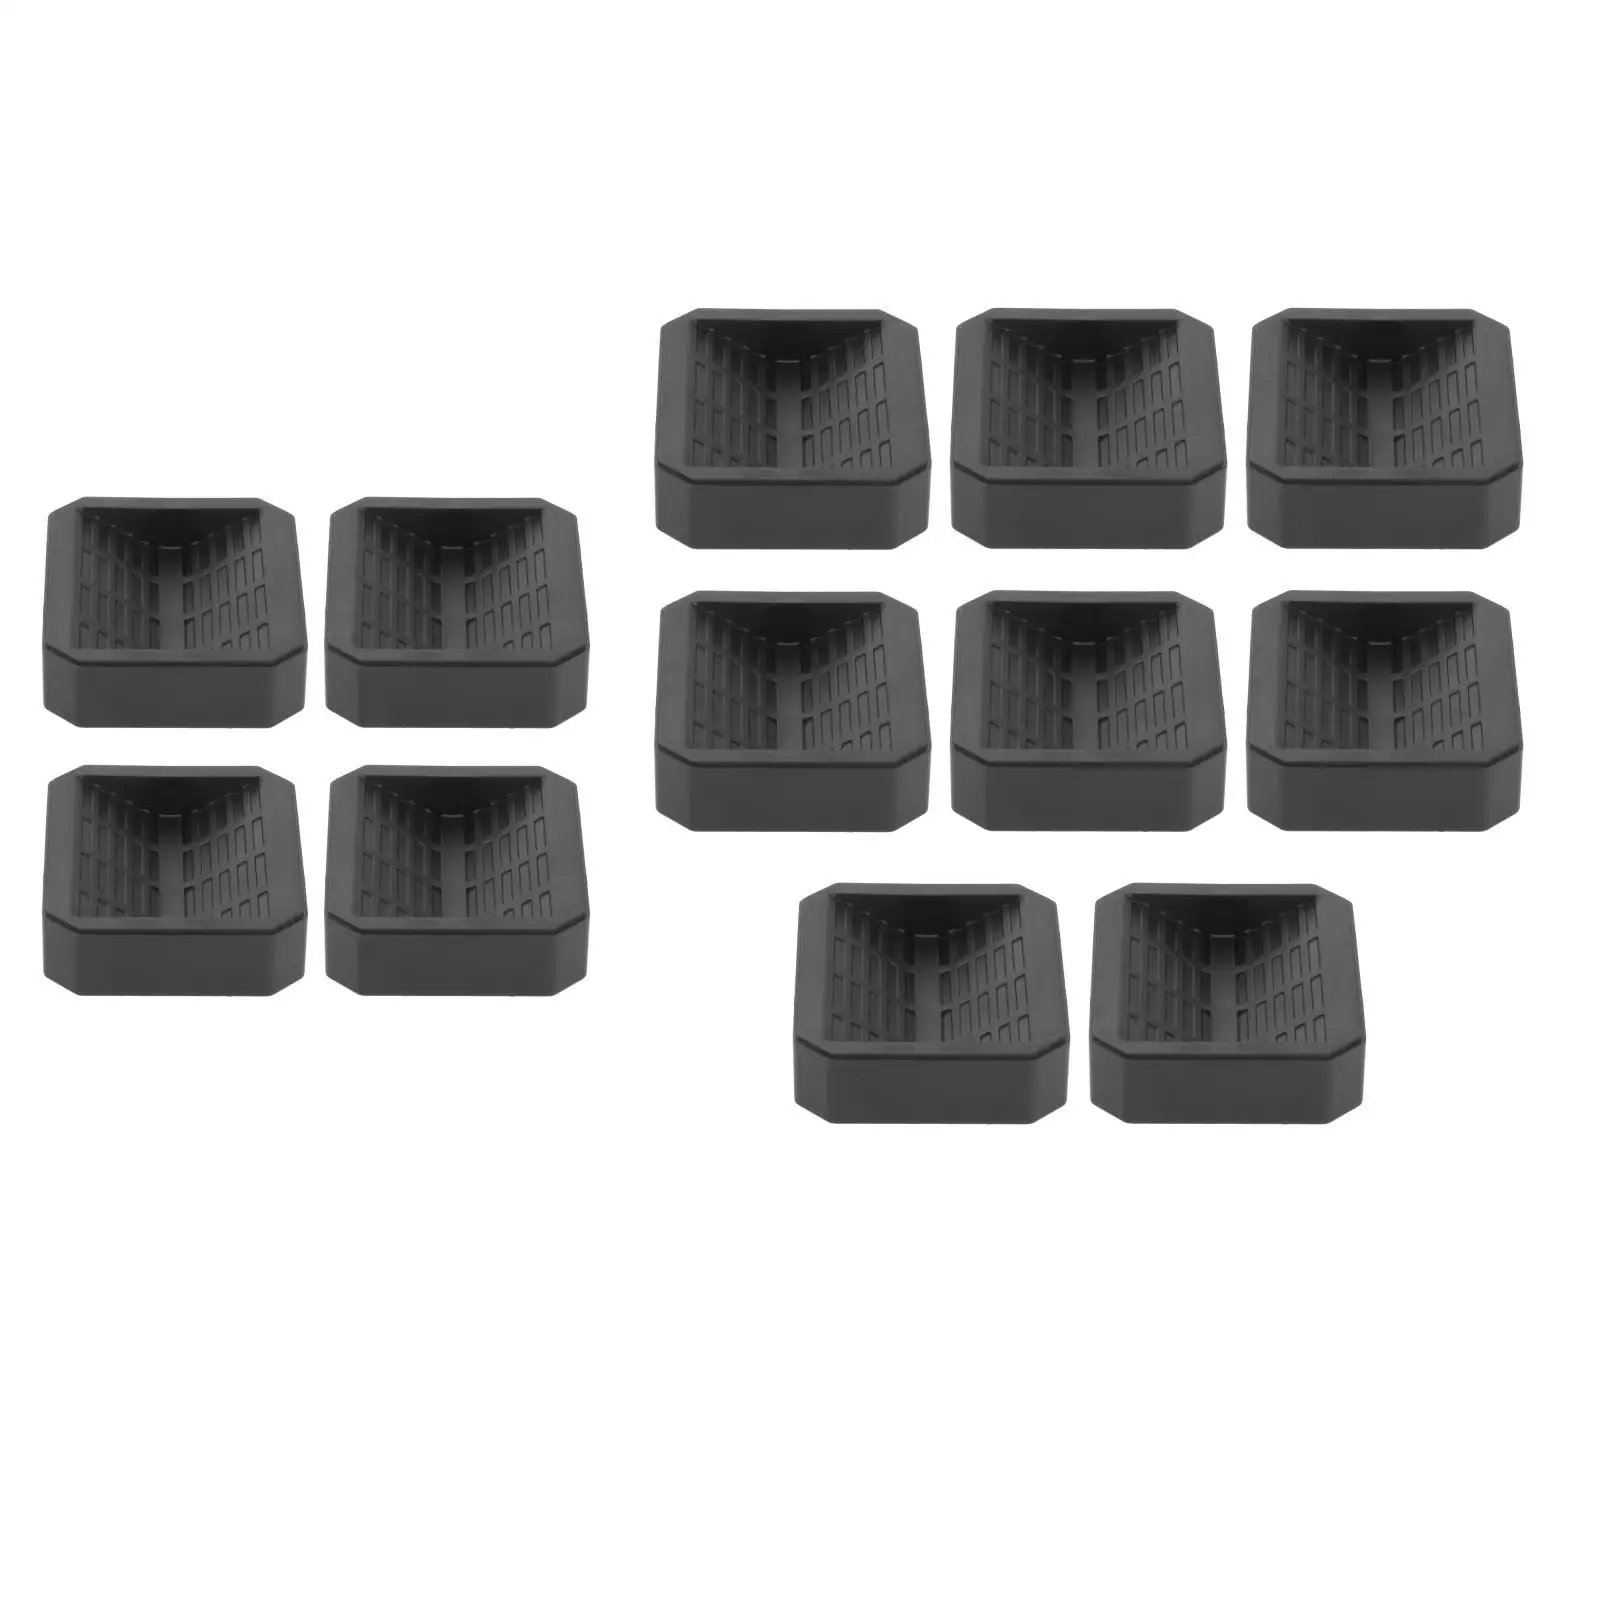 

Furniture Caster Cups Non Slip Floor Protectors Silent Plastic Casters Furniture Wheel Stoppers for Hard Floors Sofas Carpet